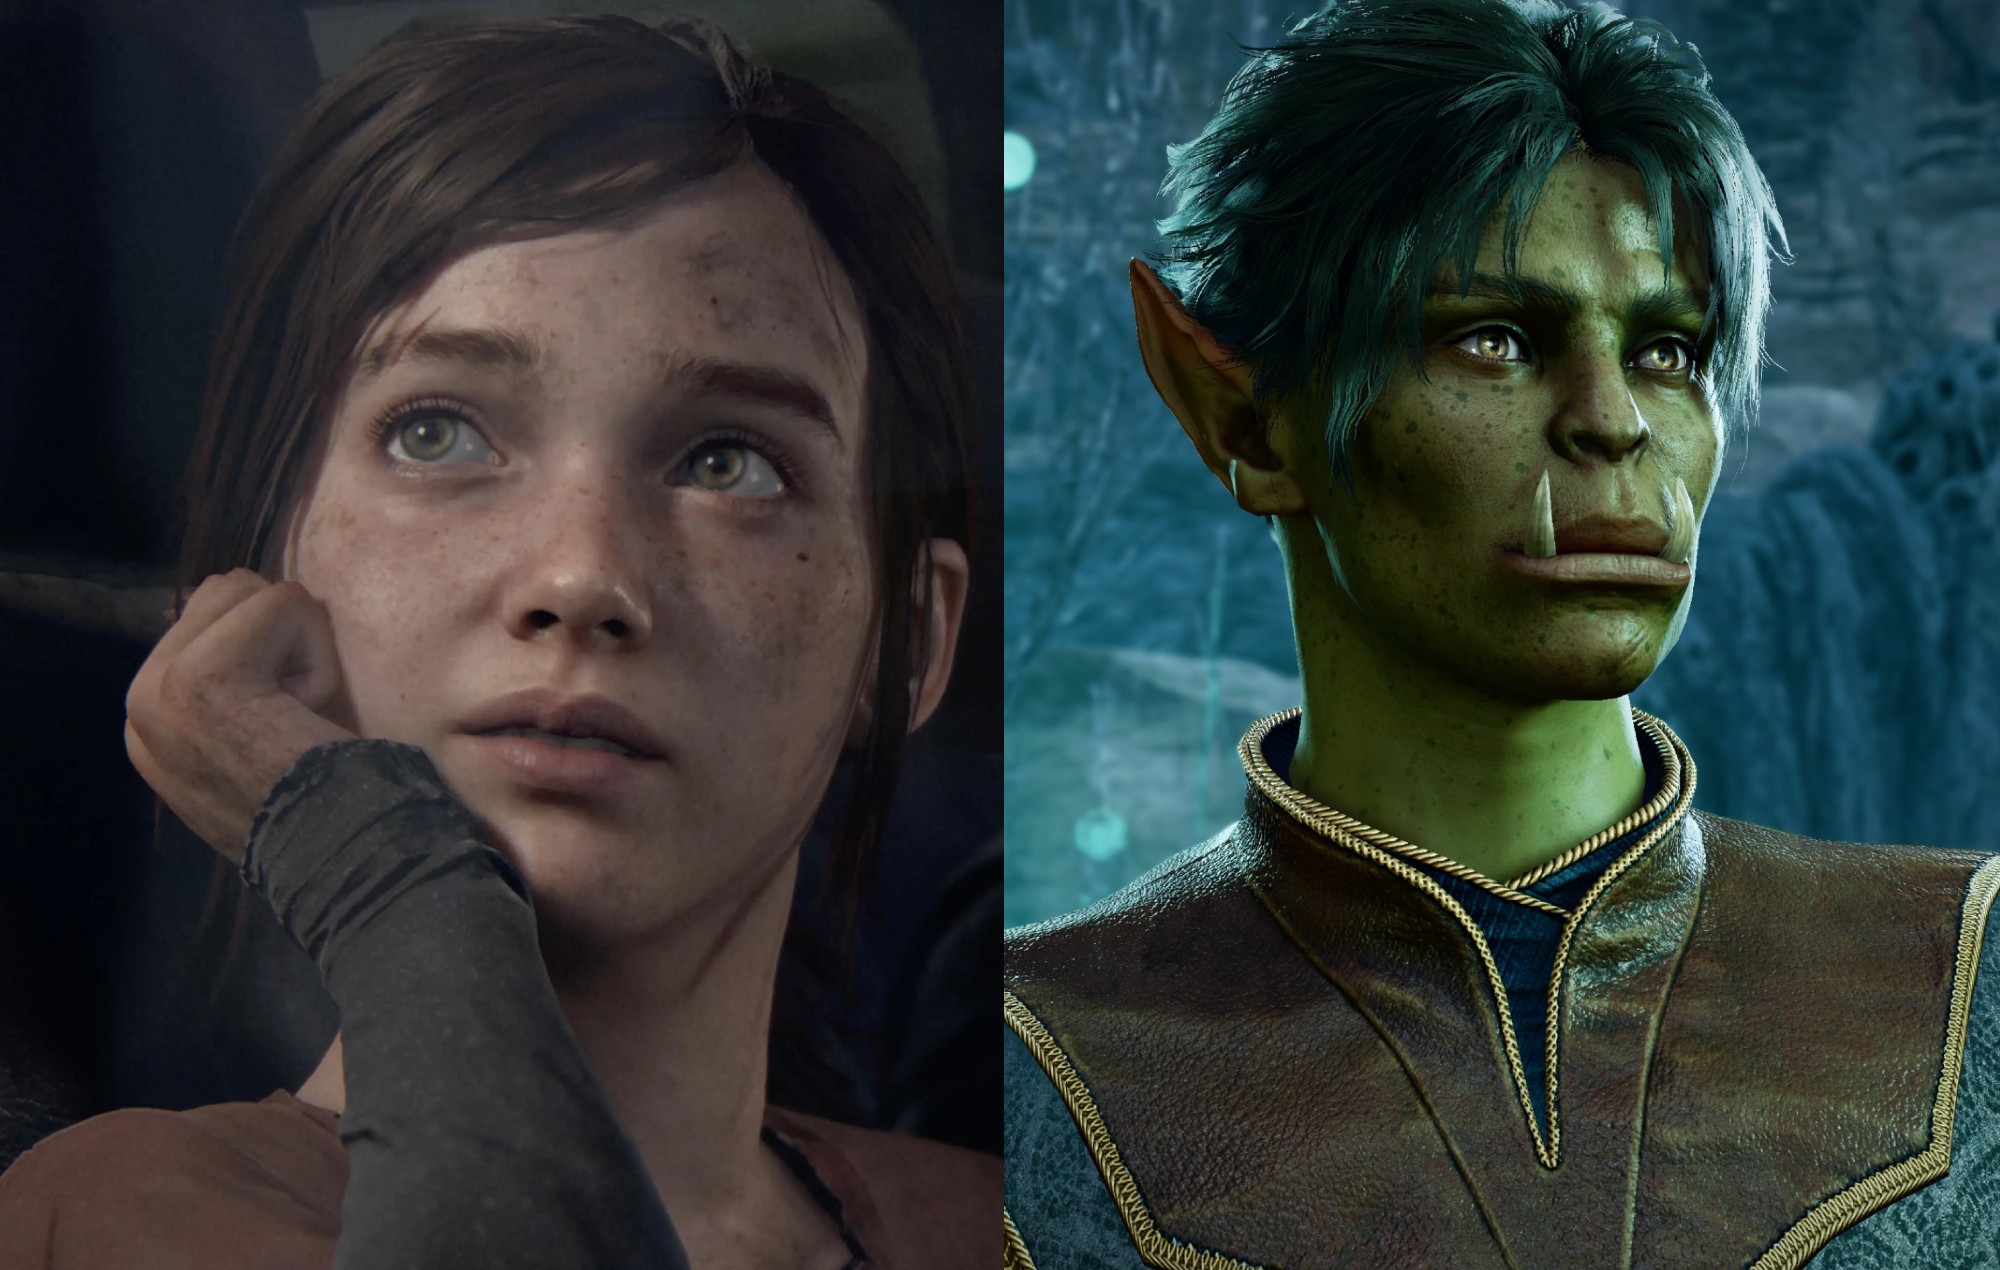 ‘The Last of Us’ and ‘Baldur’s Gate 3’ live concerts announced for 2024